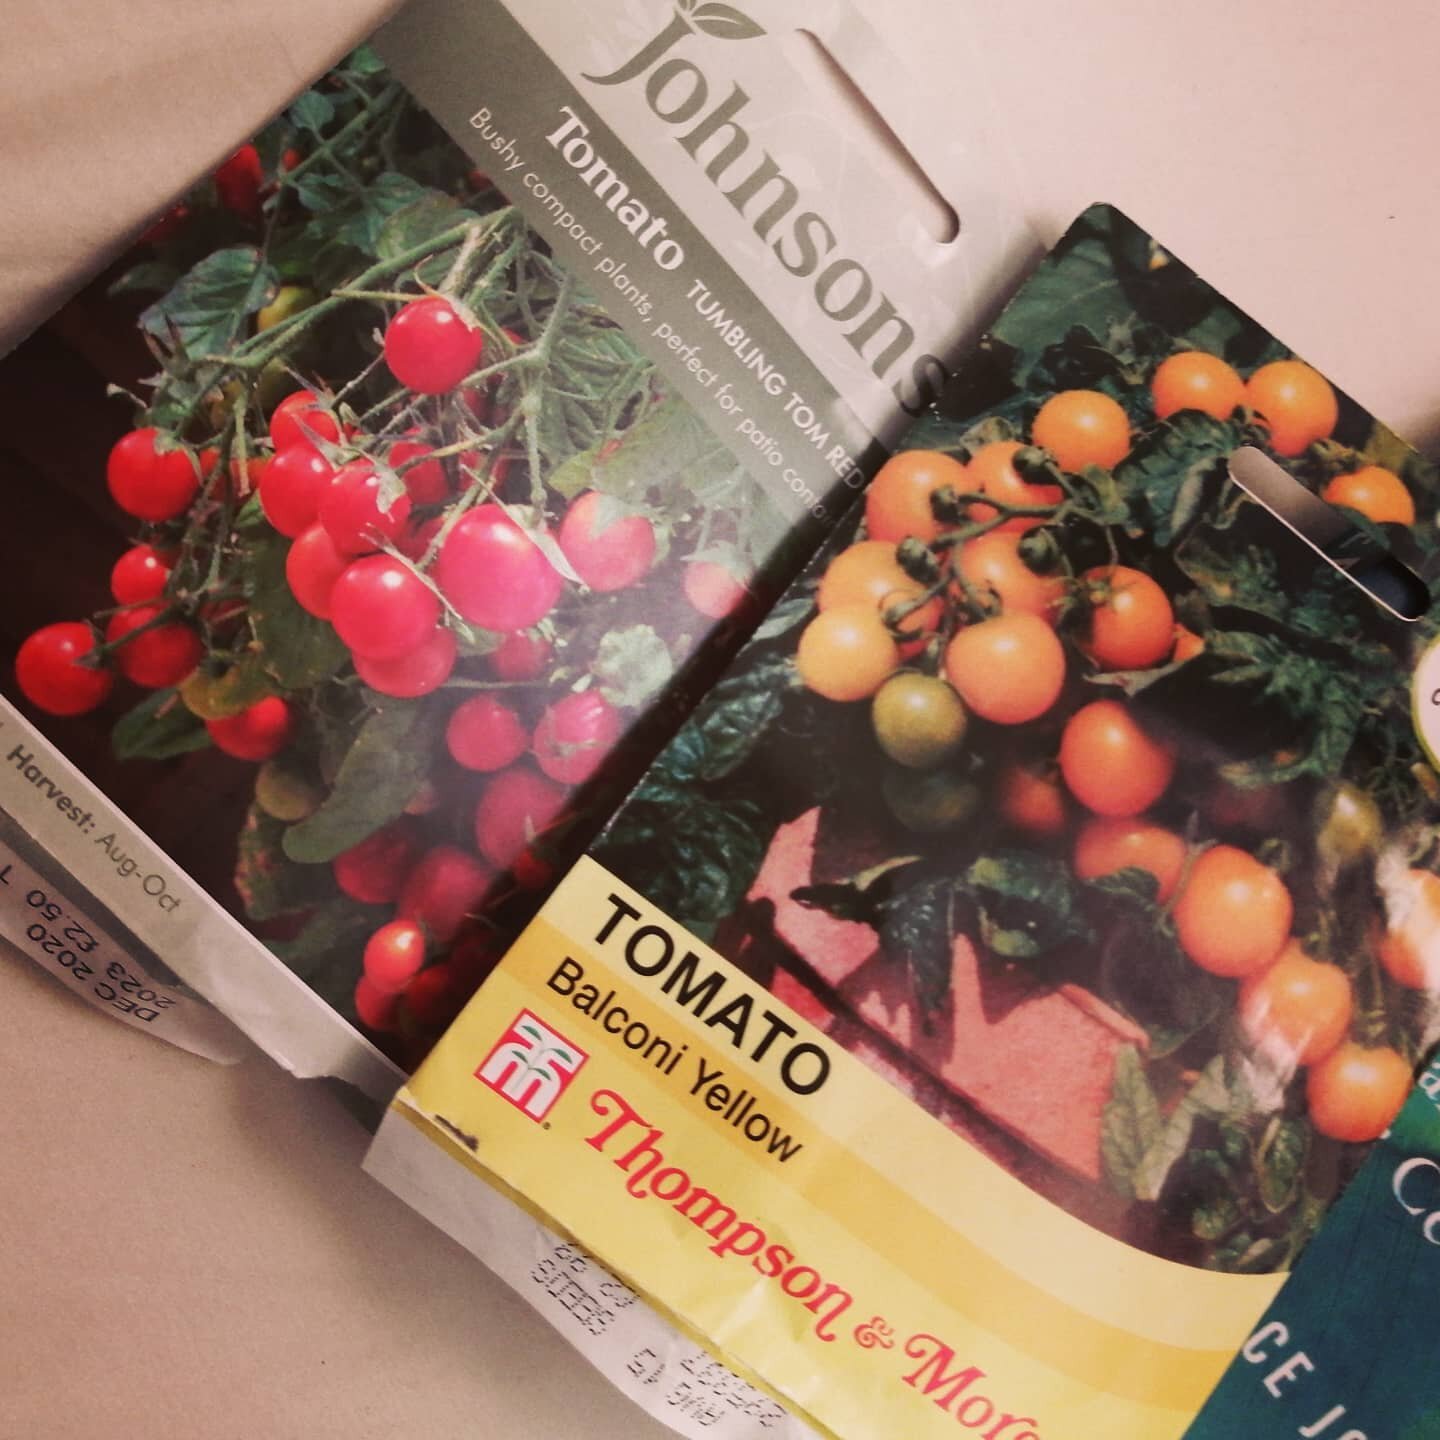 If any other health/key worker peeps want a plant I'll grow it until your ready for it. Tomatoes, chillies, cucumber.... random seeds from tasty things I find in the next few months.... Just let me know.